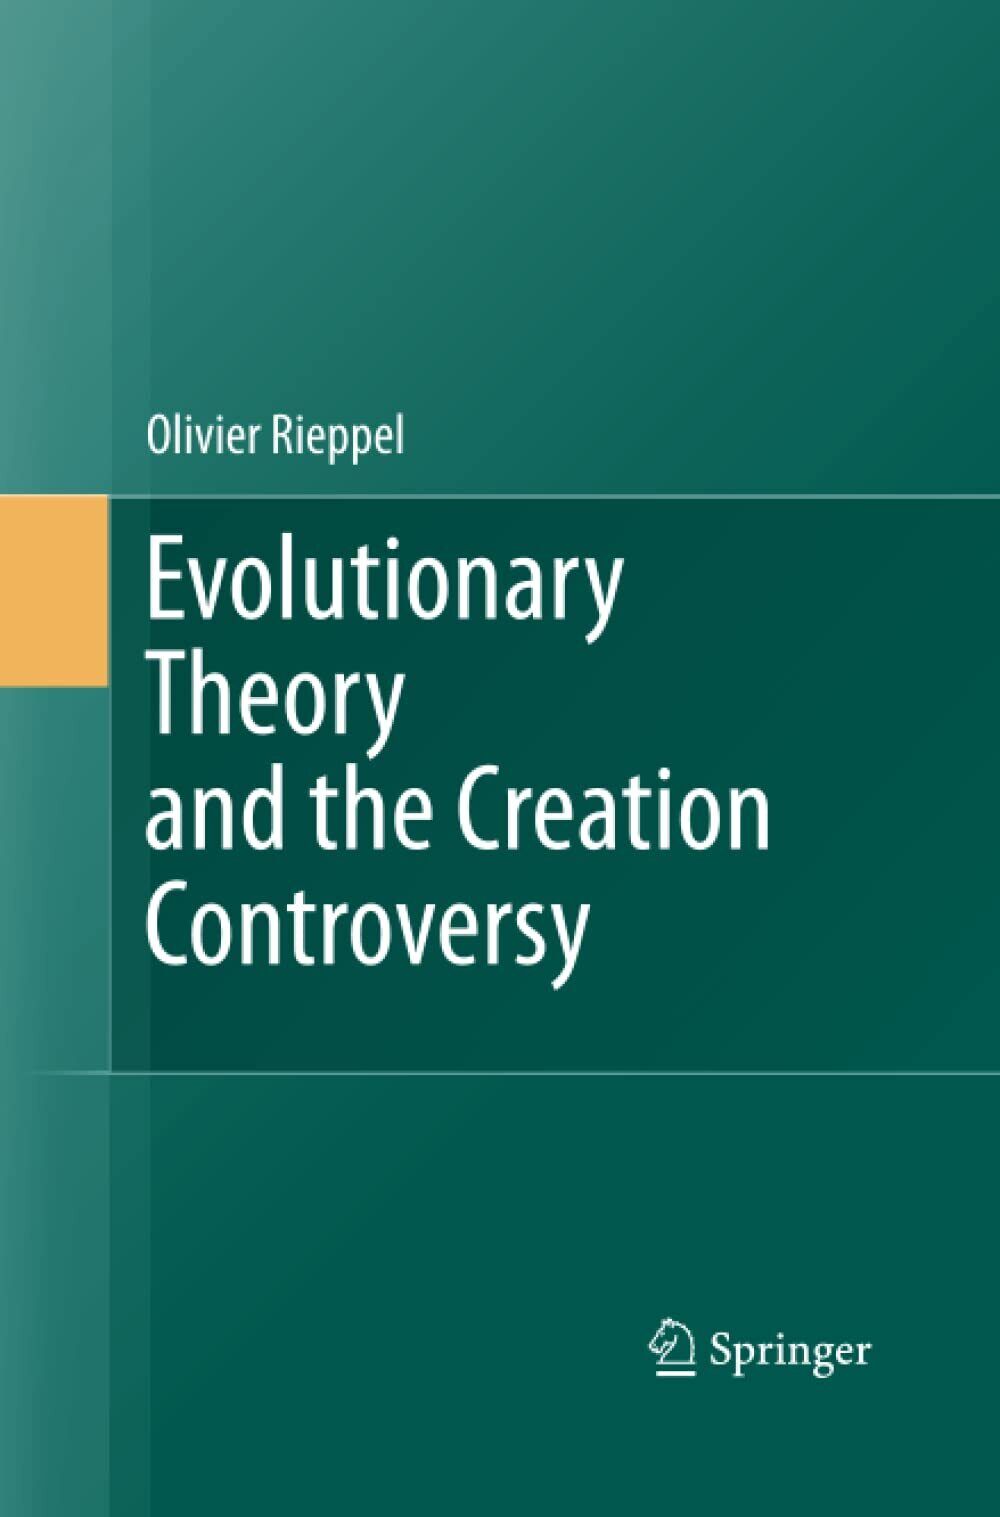 Evolutionary Theory and the Creation Controversy - Olivier Rieppel - 2014